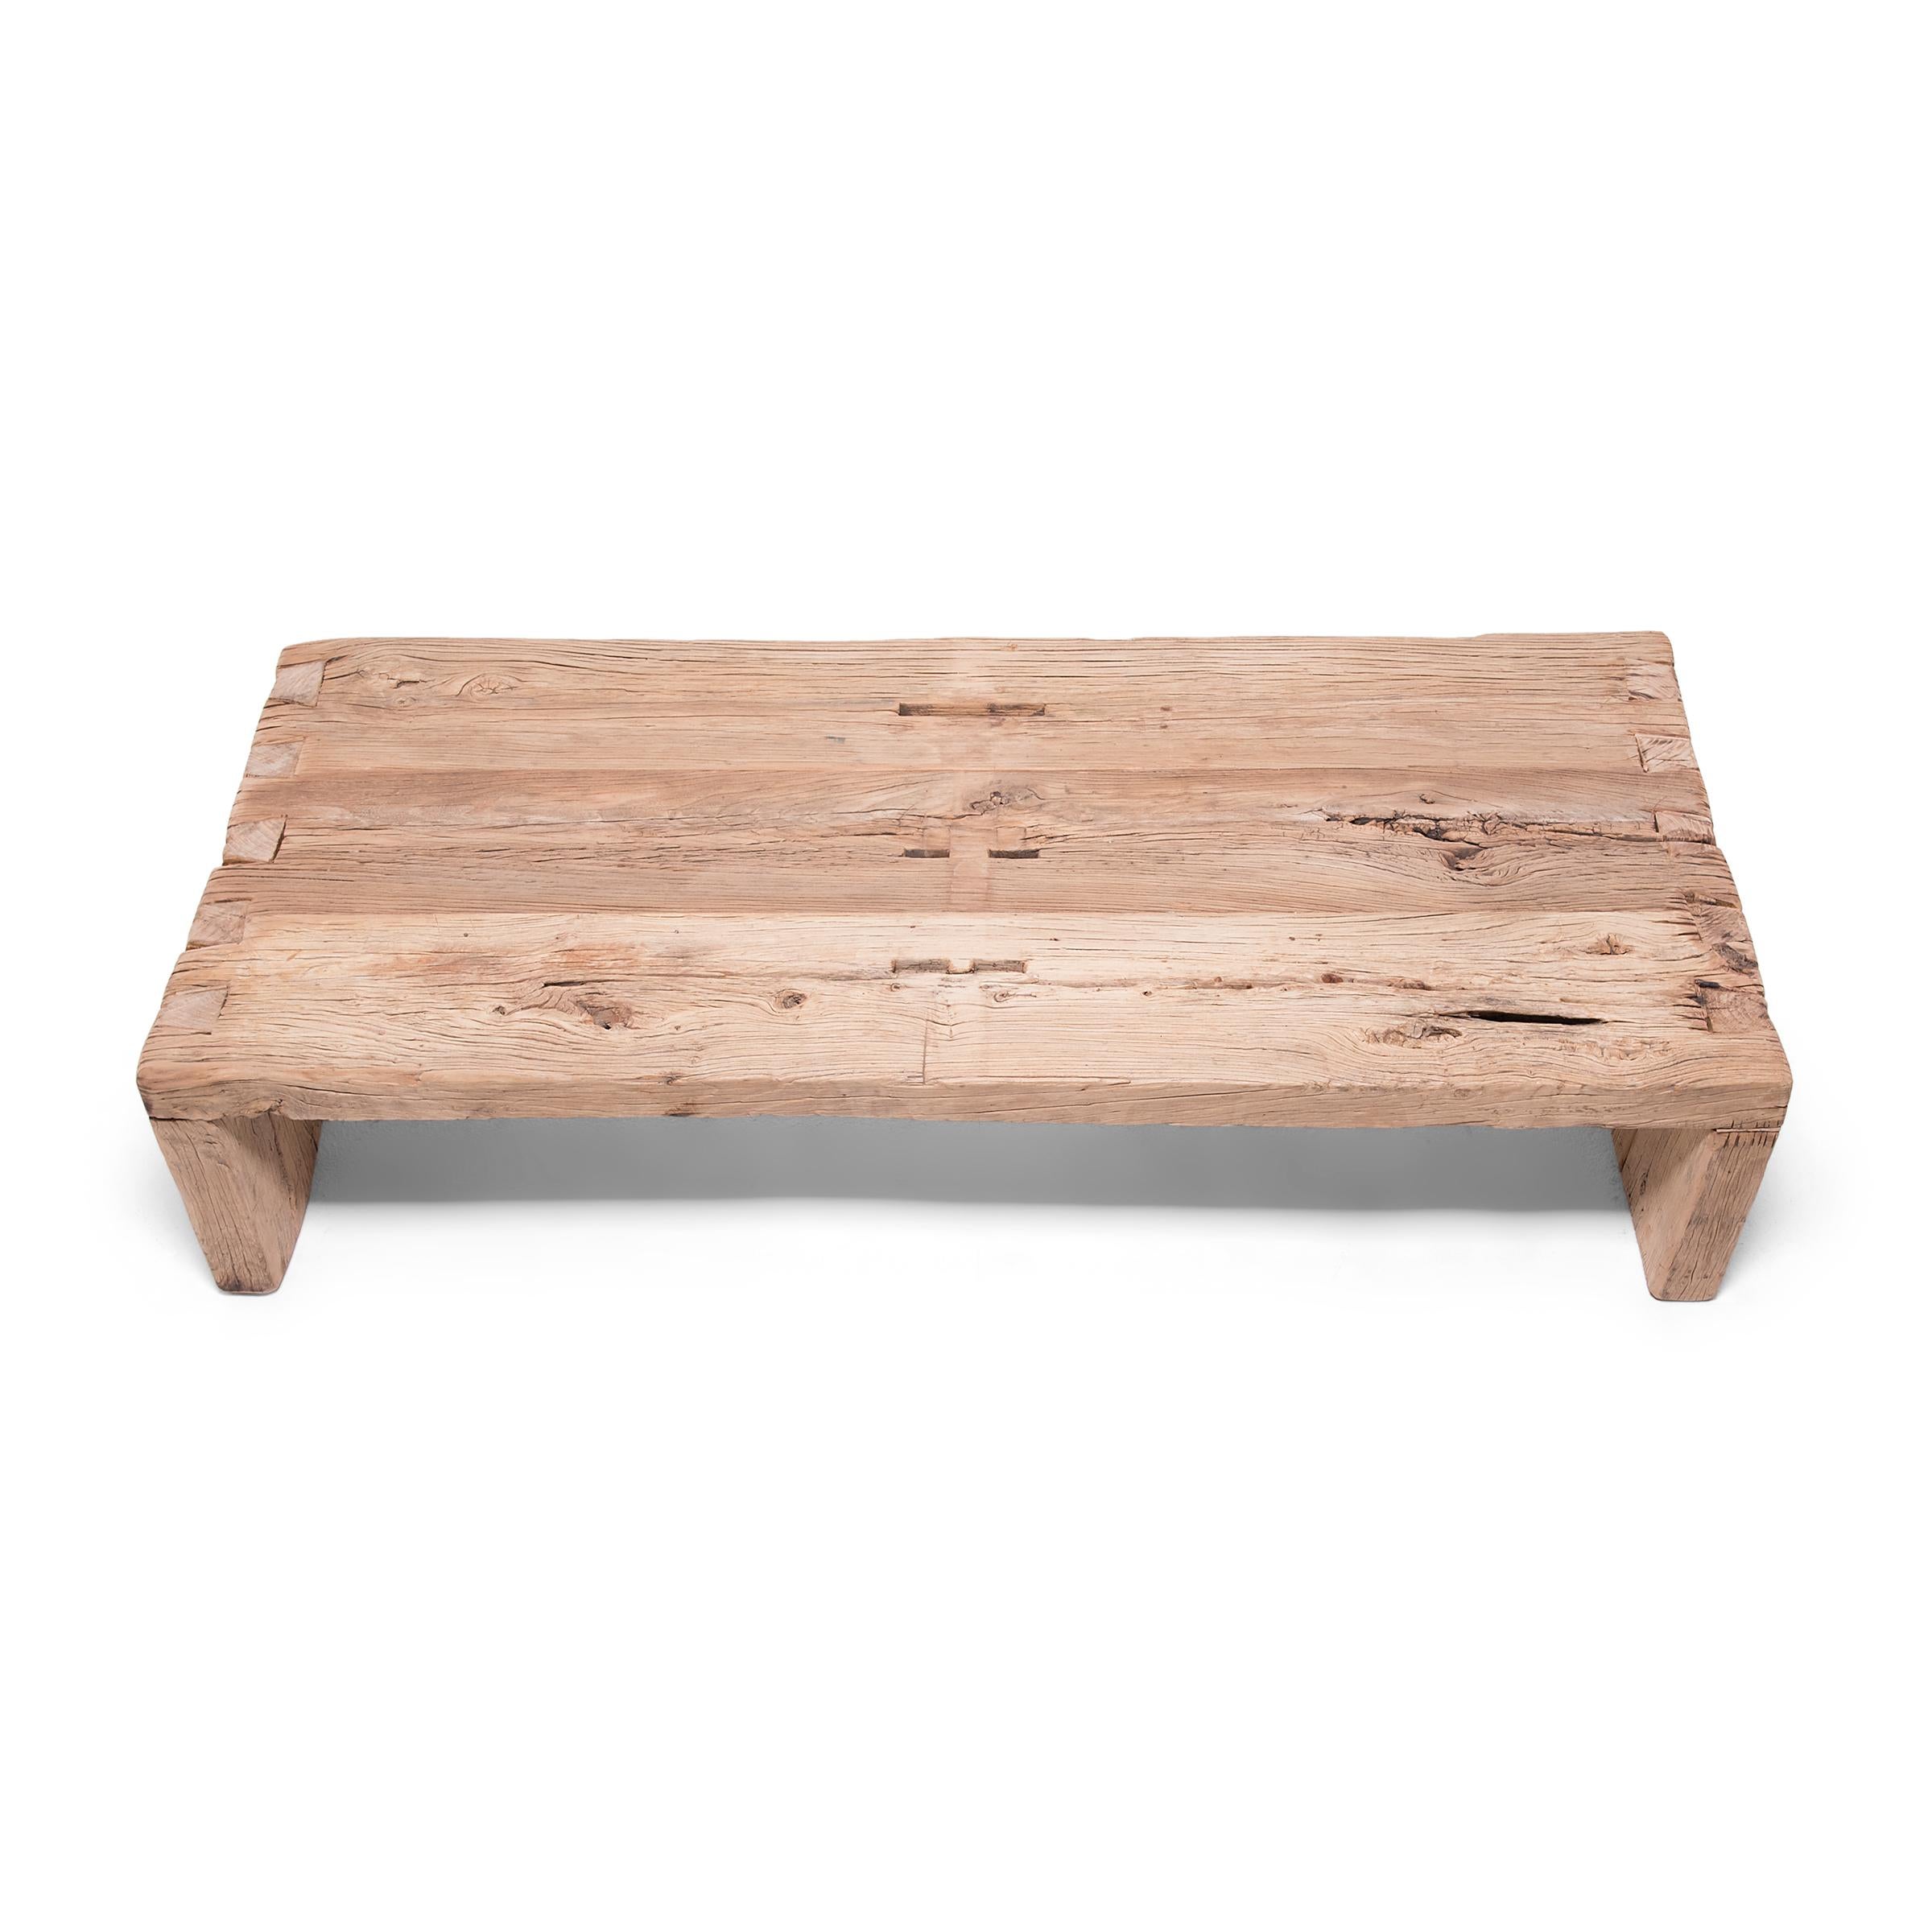 Chinese Custom Reclaimed Elm Coffee Table For Sale